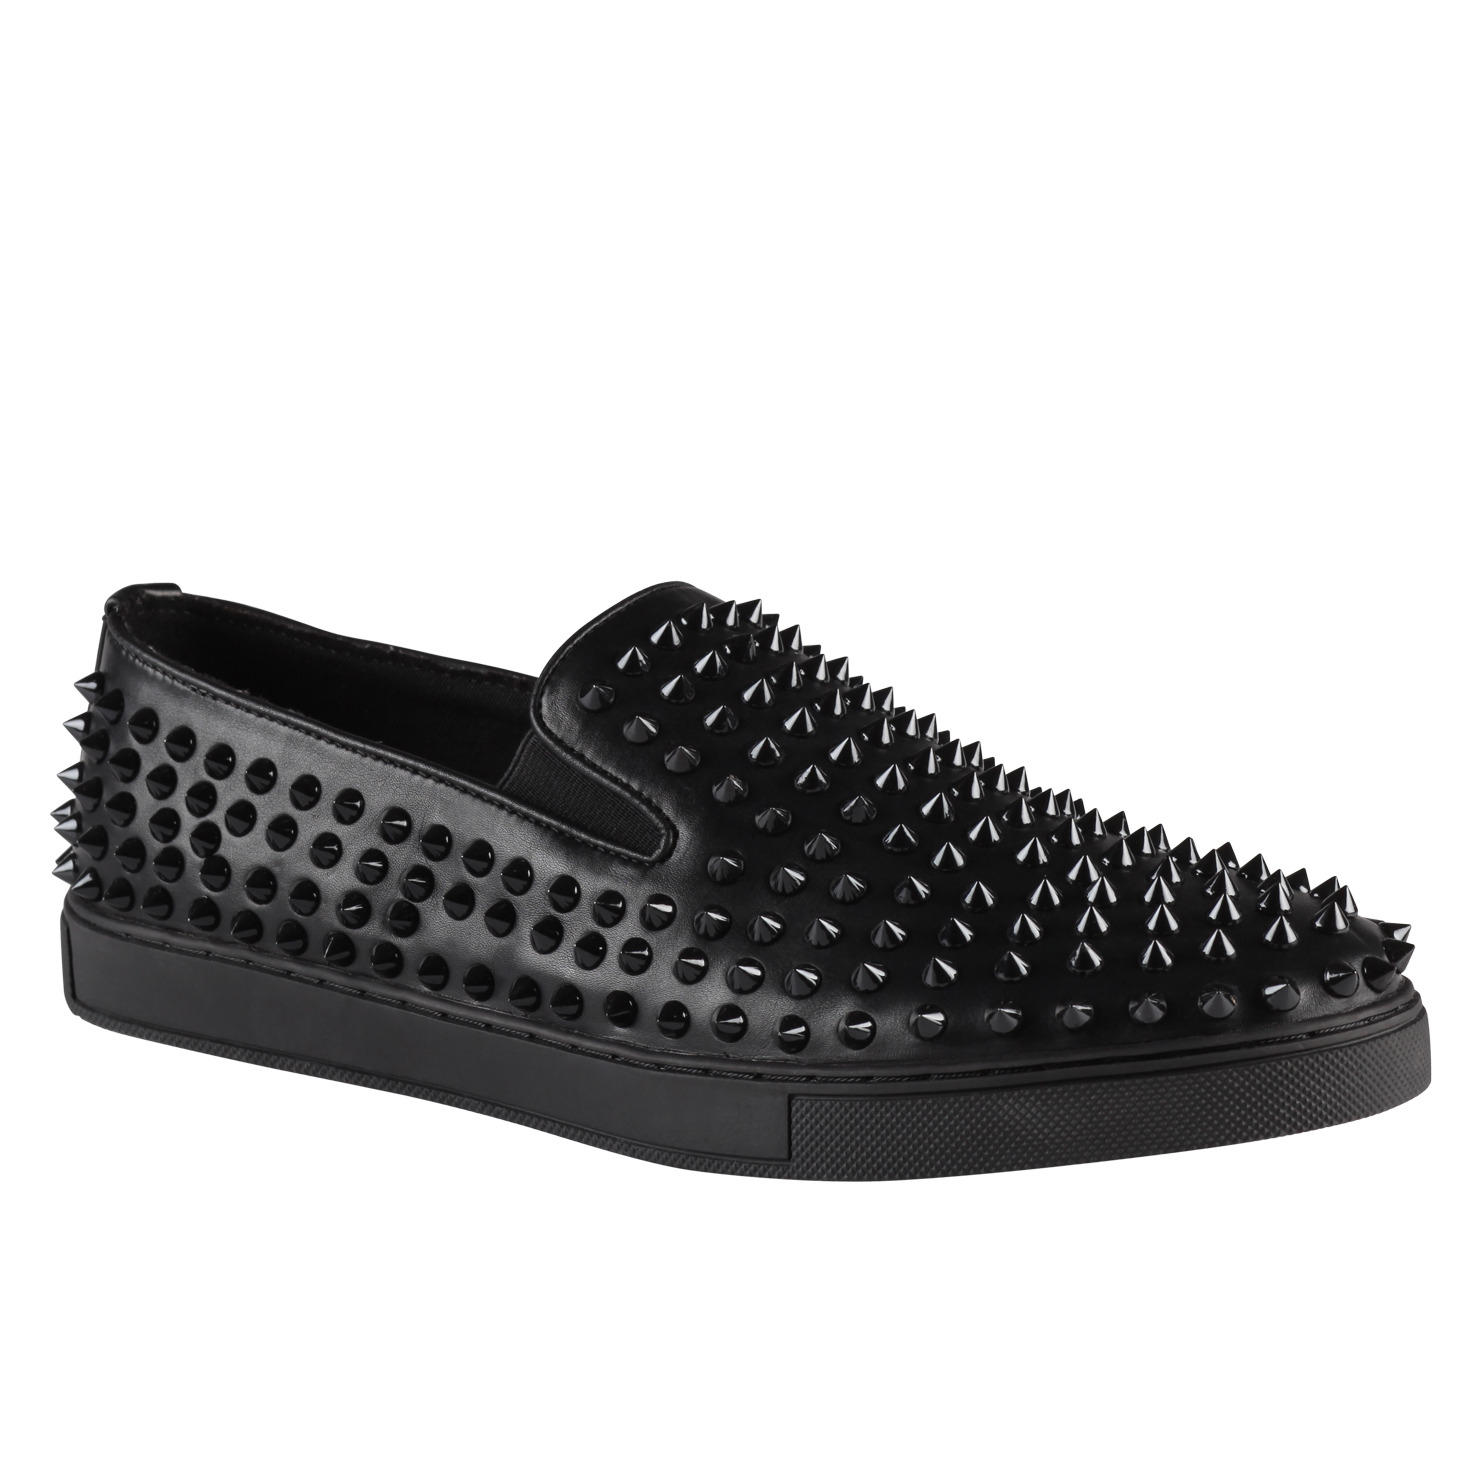 aldo shoes with spikes